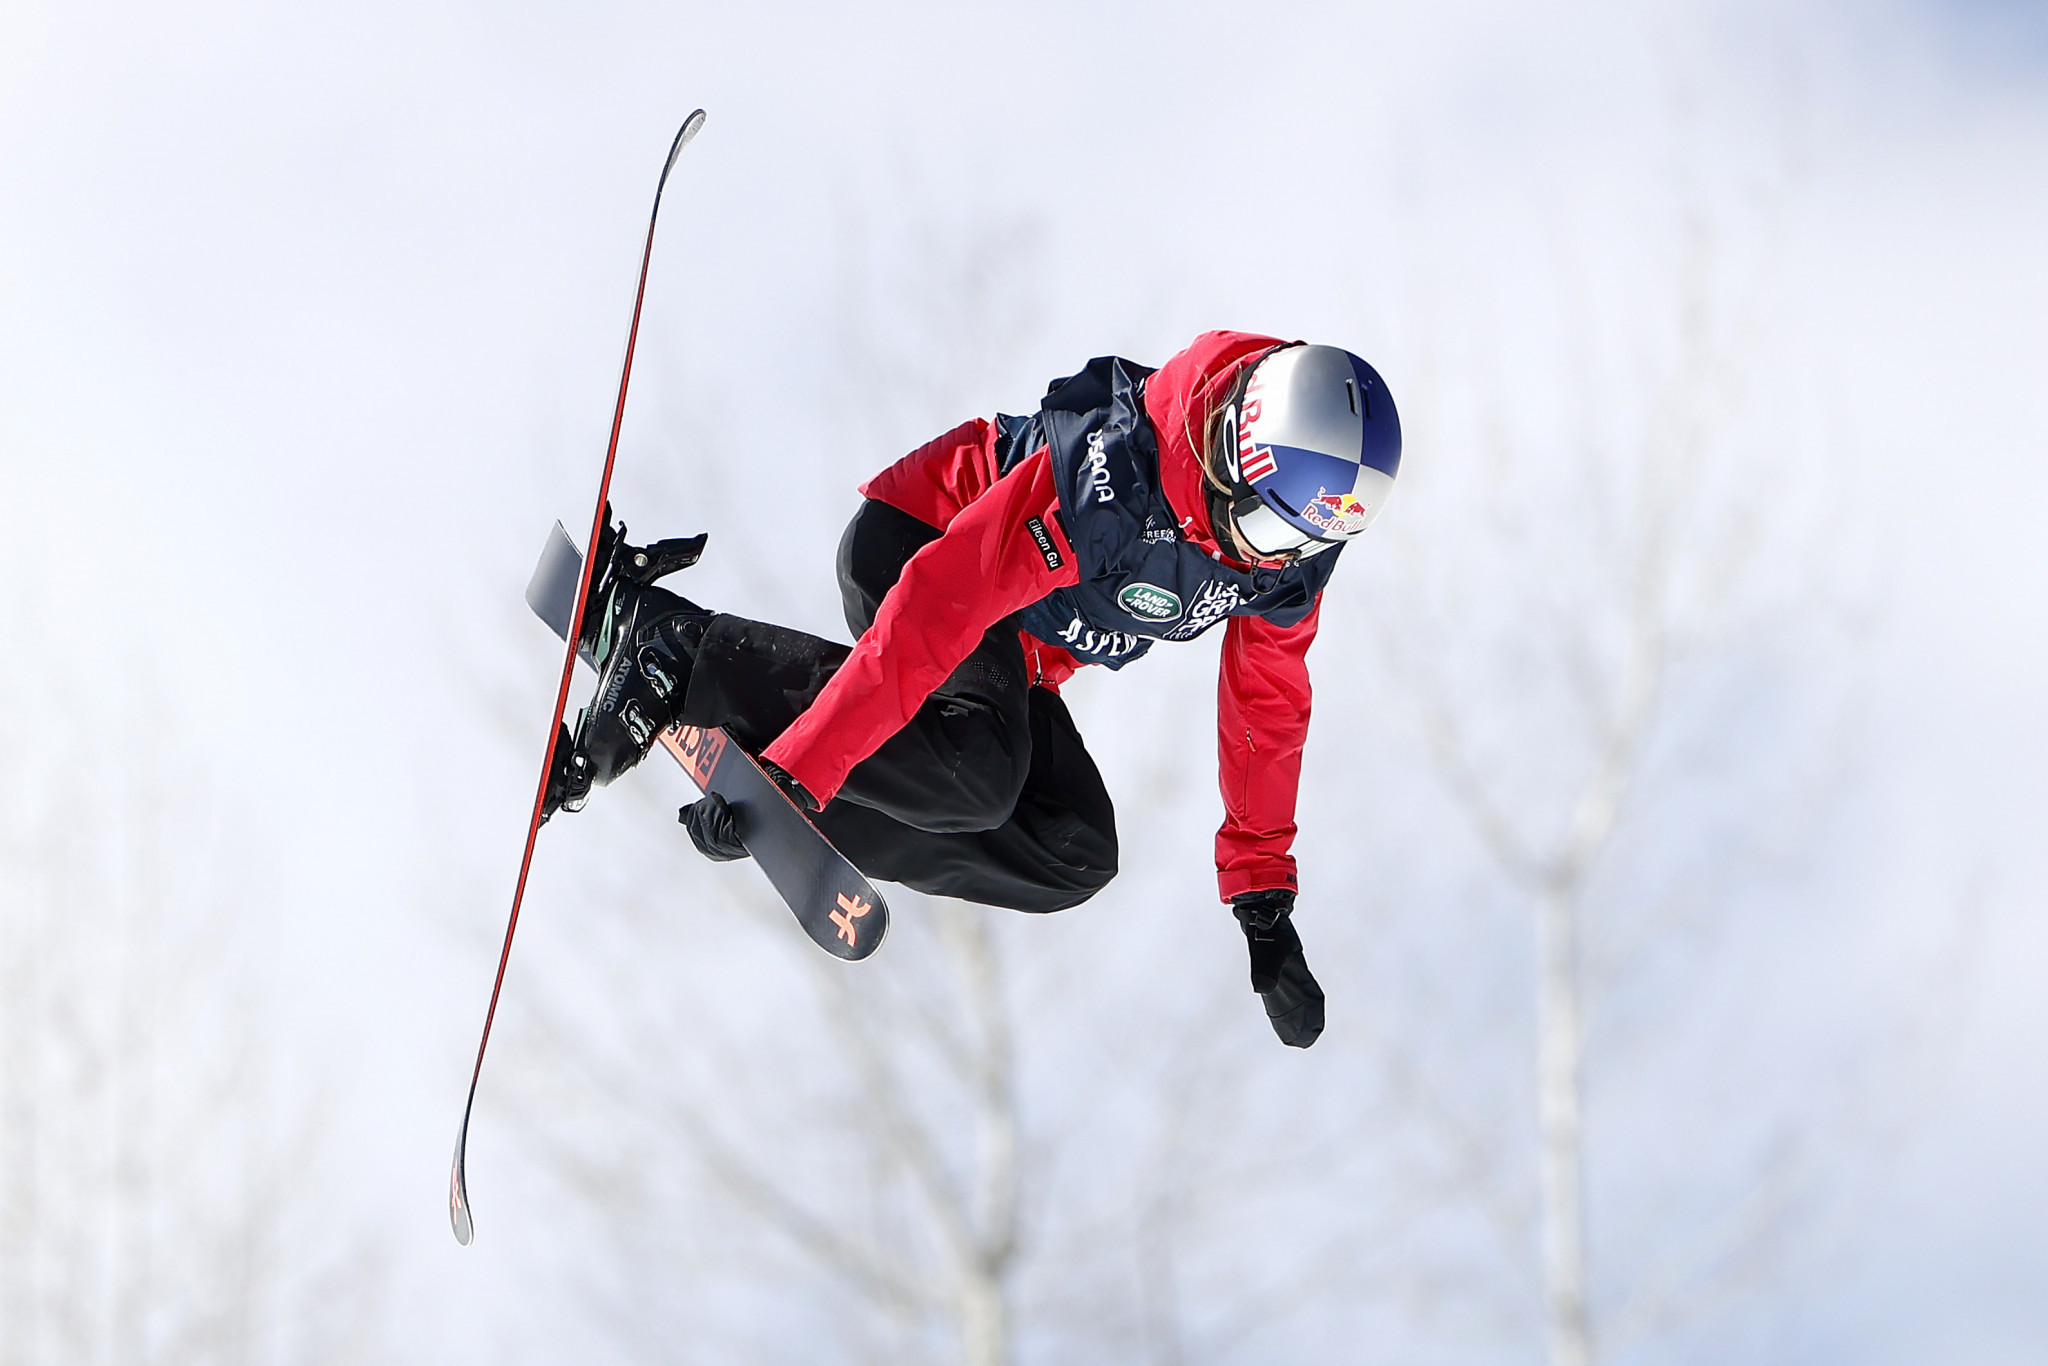 Eileen Gu has won all three women's freeski halfpipe World Cup competitions this season ©Getty Images